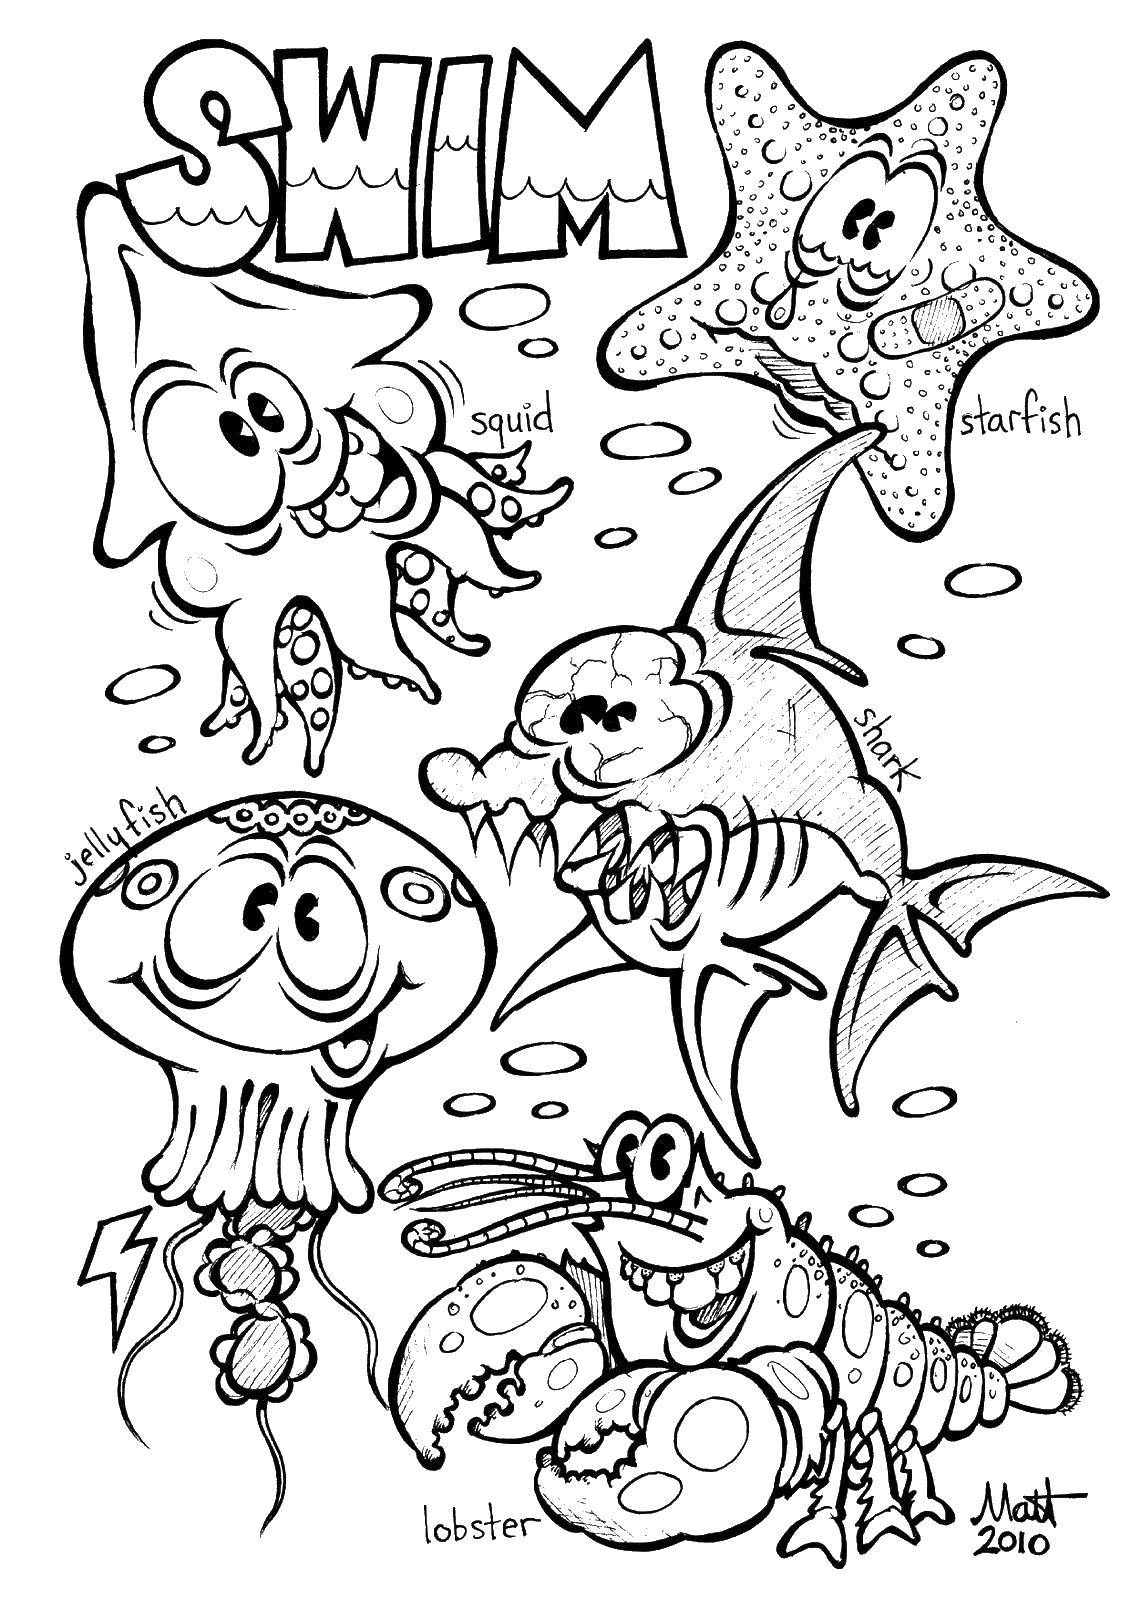 Coloring The inhabitants of the sea.. Category marine. Tags:  marine animals, water, sea, fish.